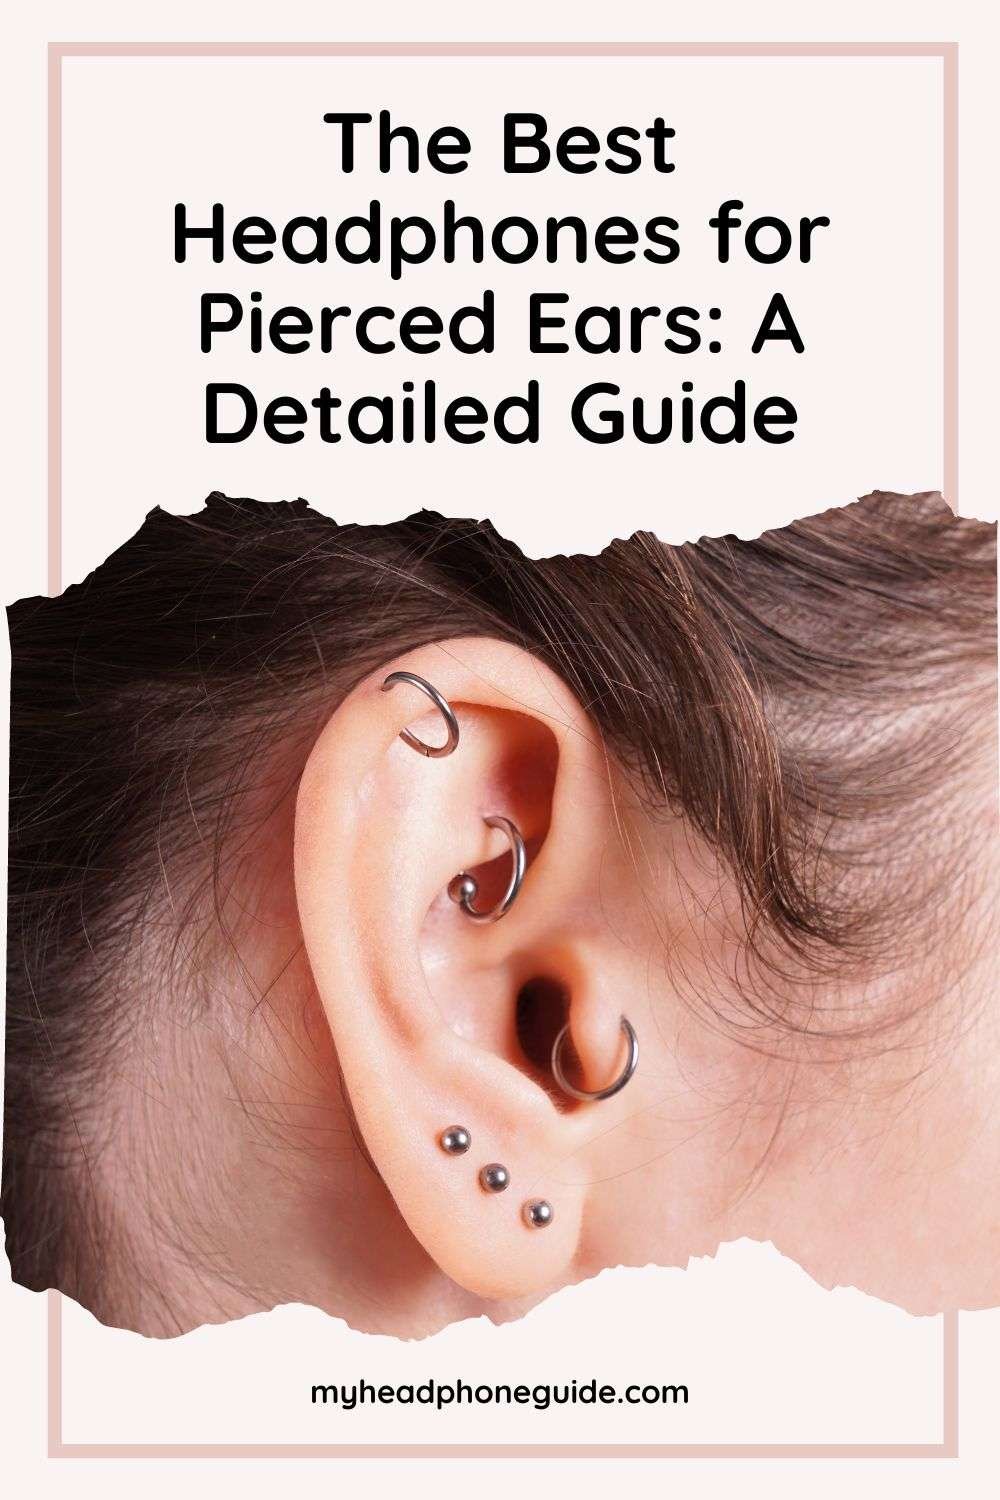 The Best Headphones for Pierced Ears: A Detailed Guide